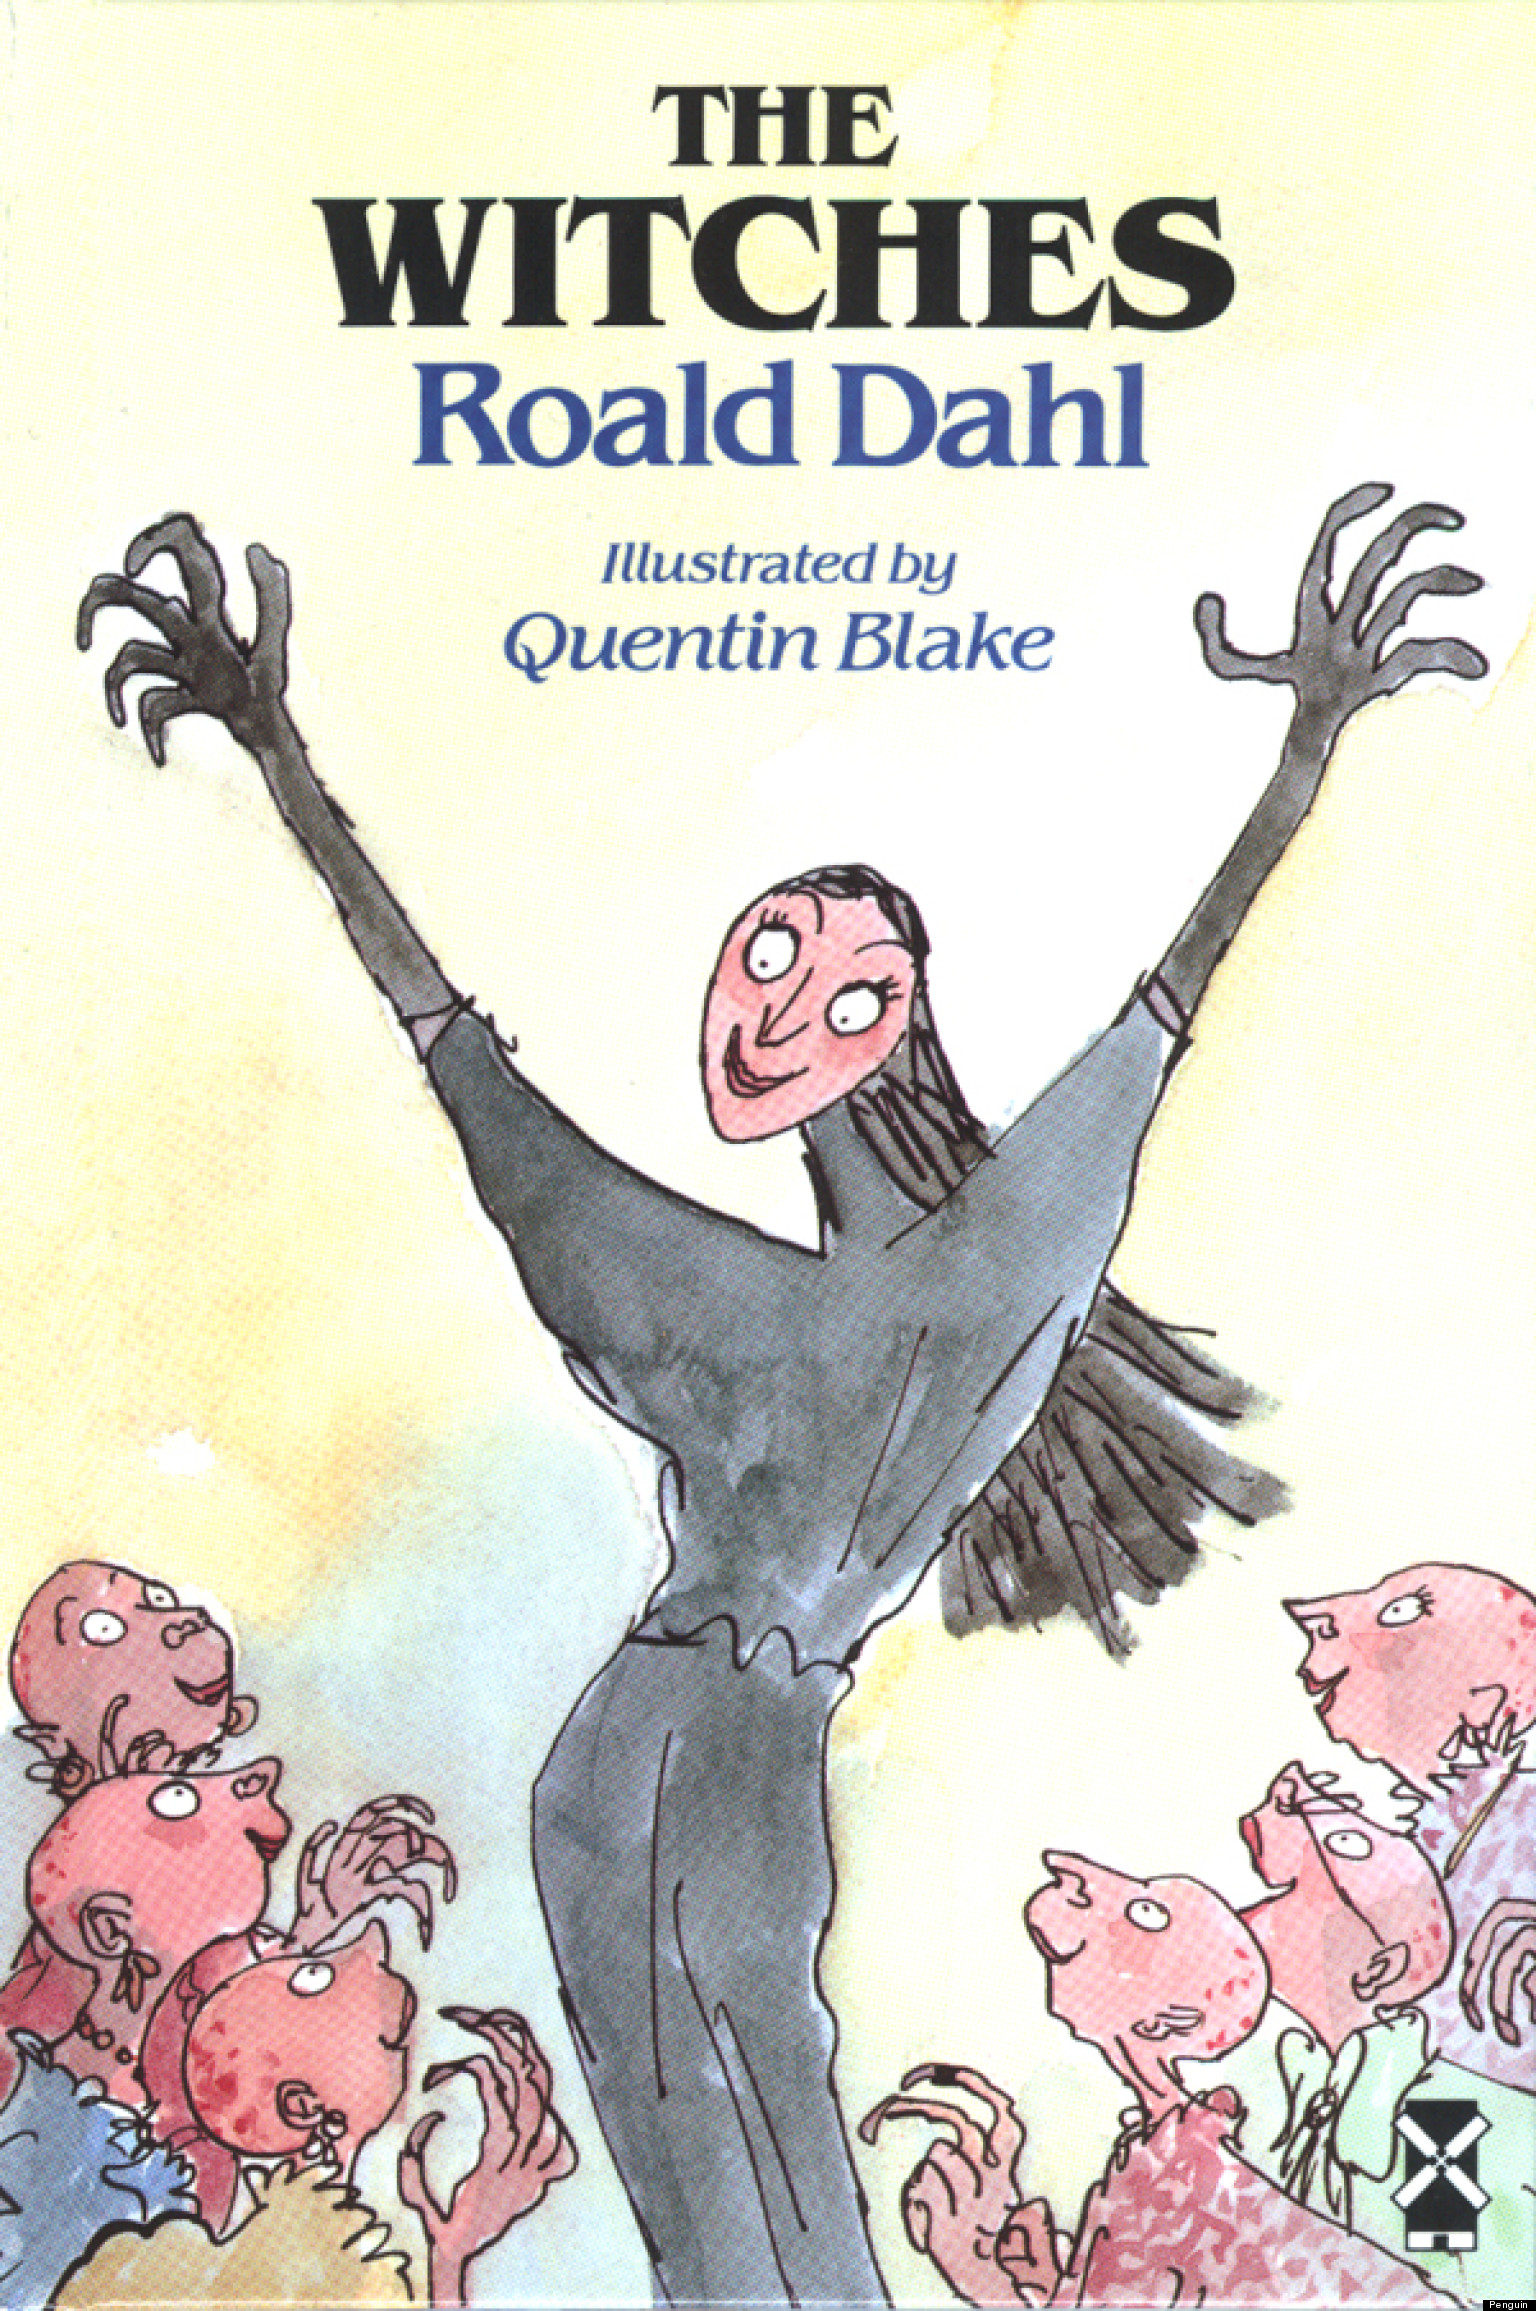 What Can We Learn From Roald Dahl's The Witches? | HuffPost